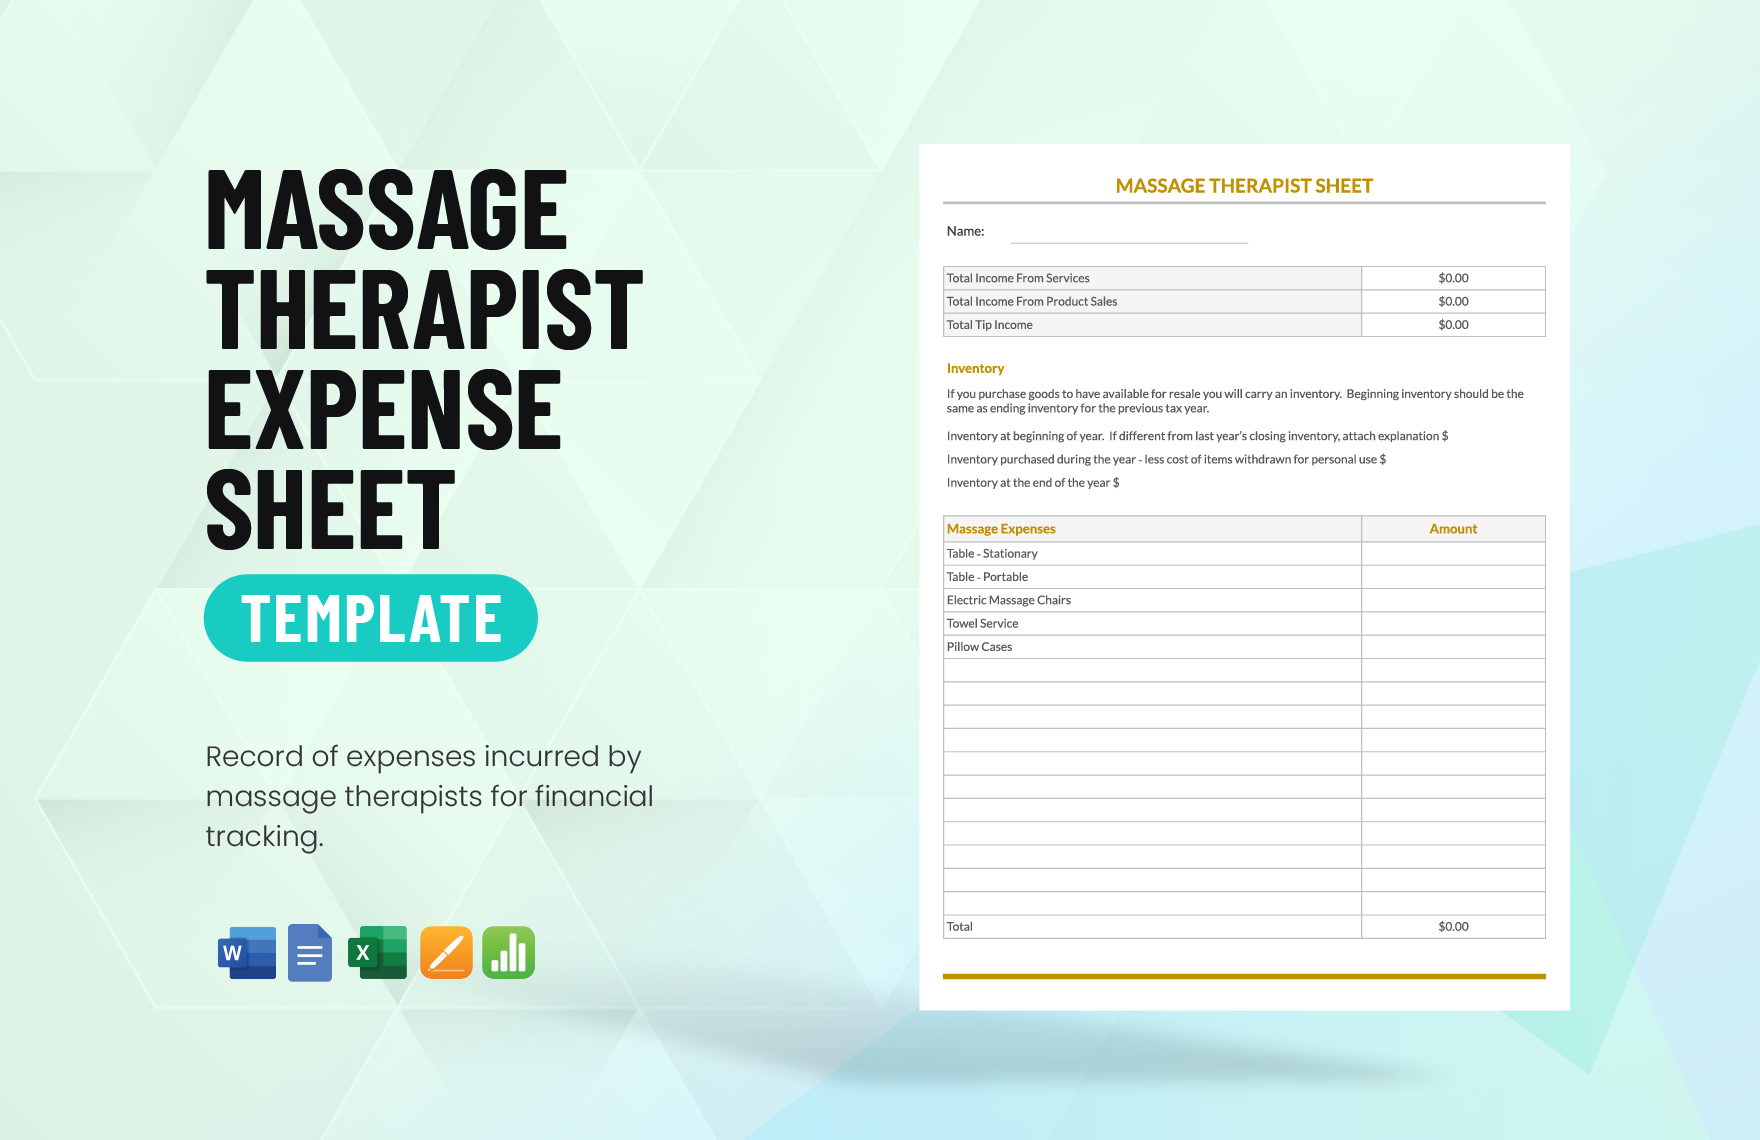 Massage Therapist Expense Sheet Template in Word, Google Docs, Excel, Apple Pages, Apple Numbers